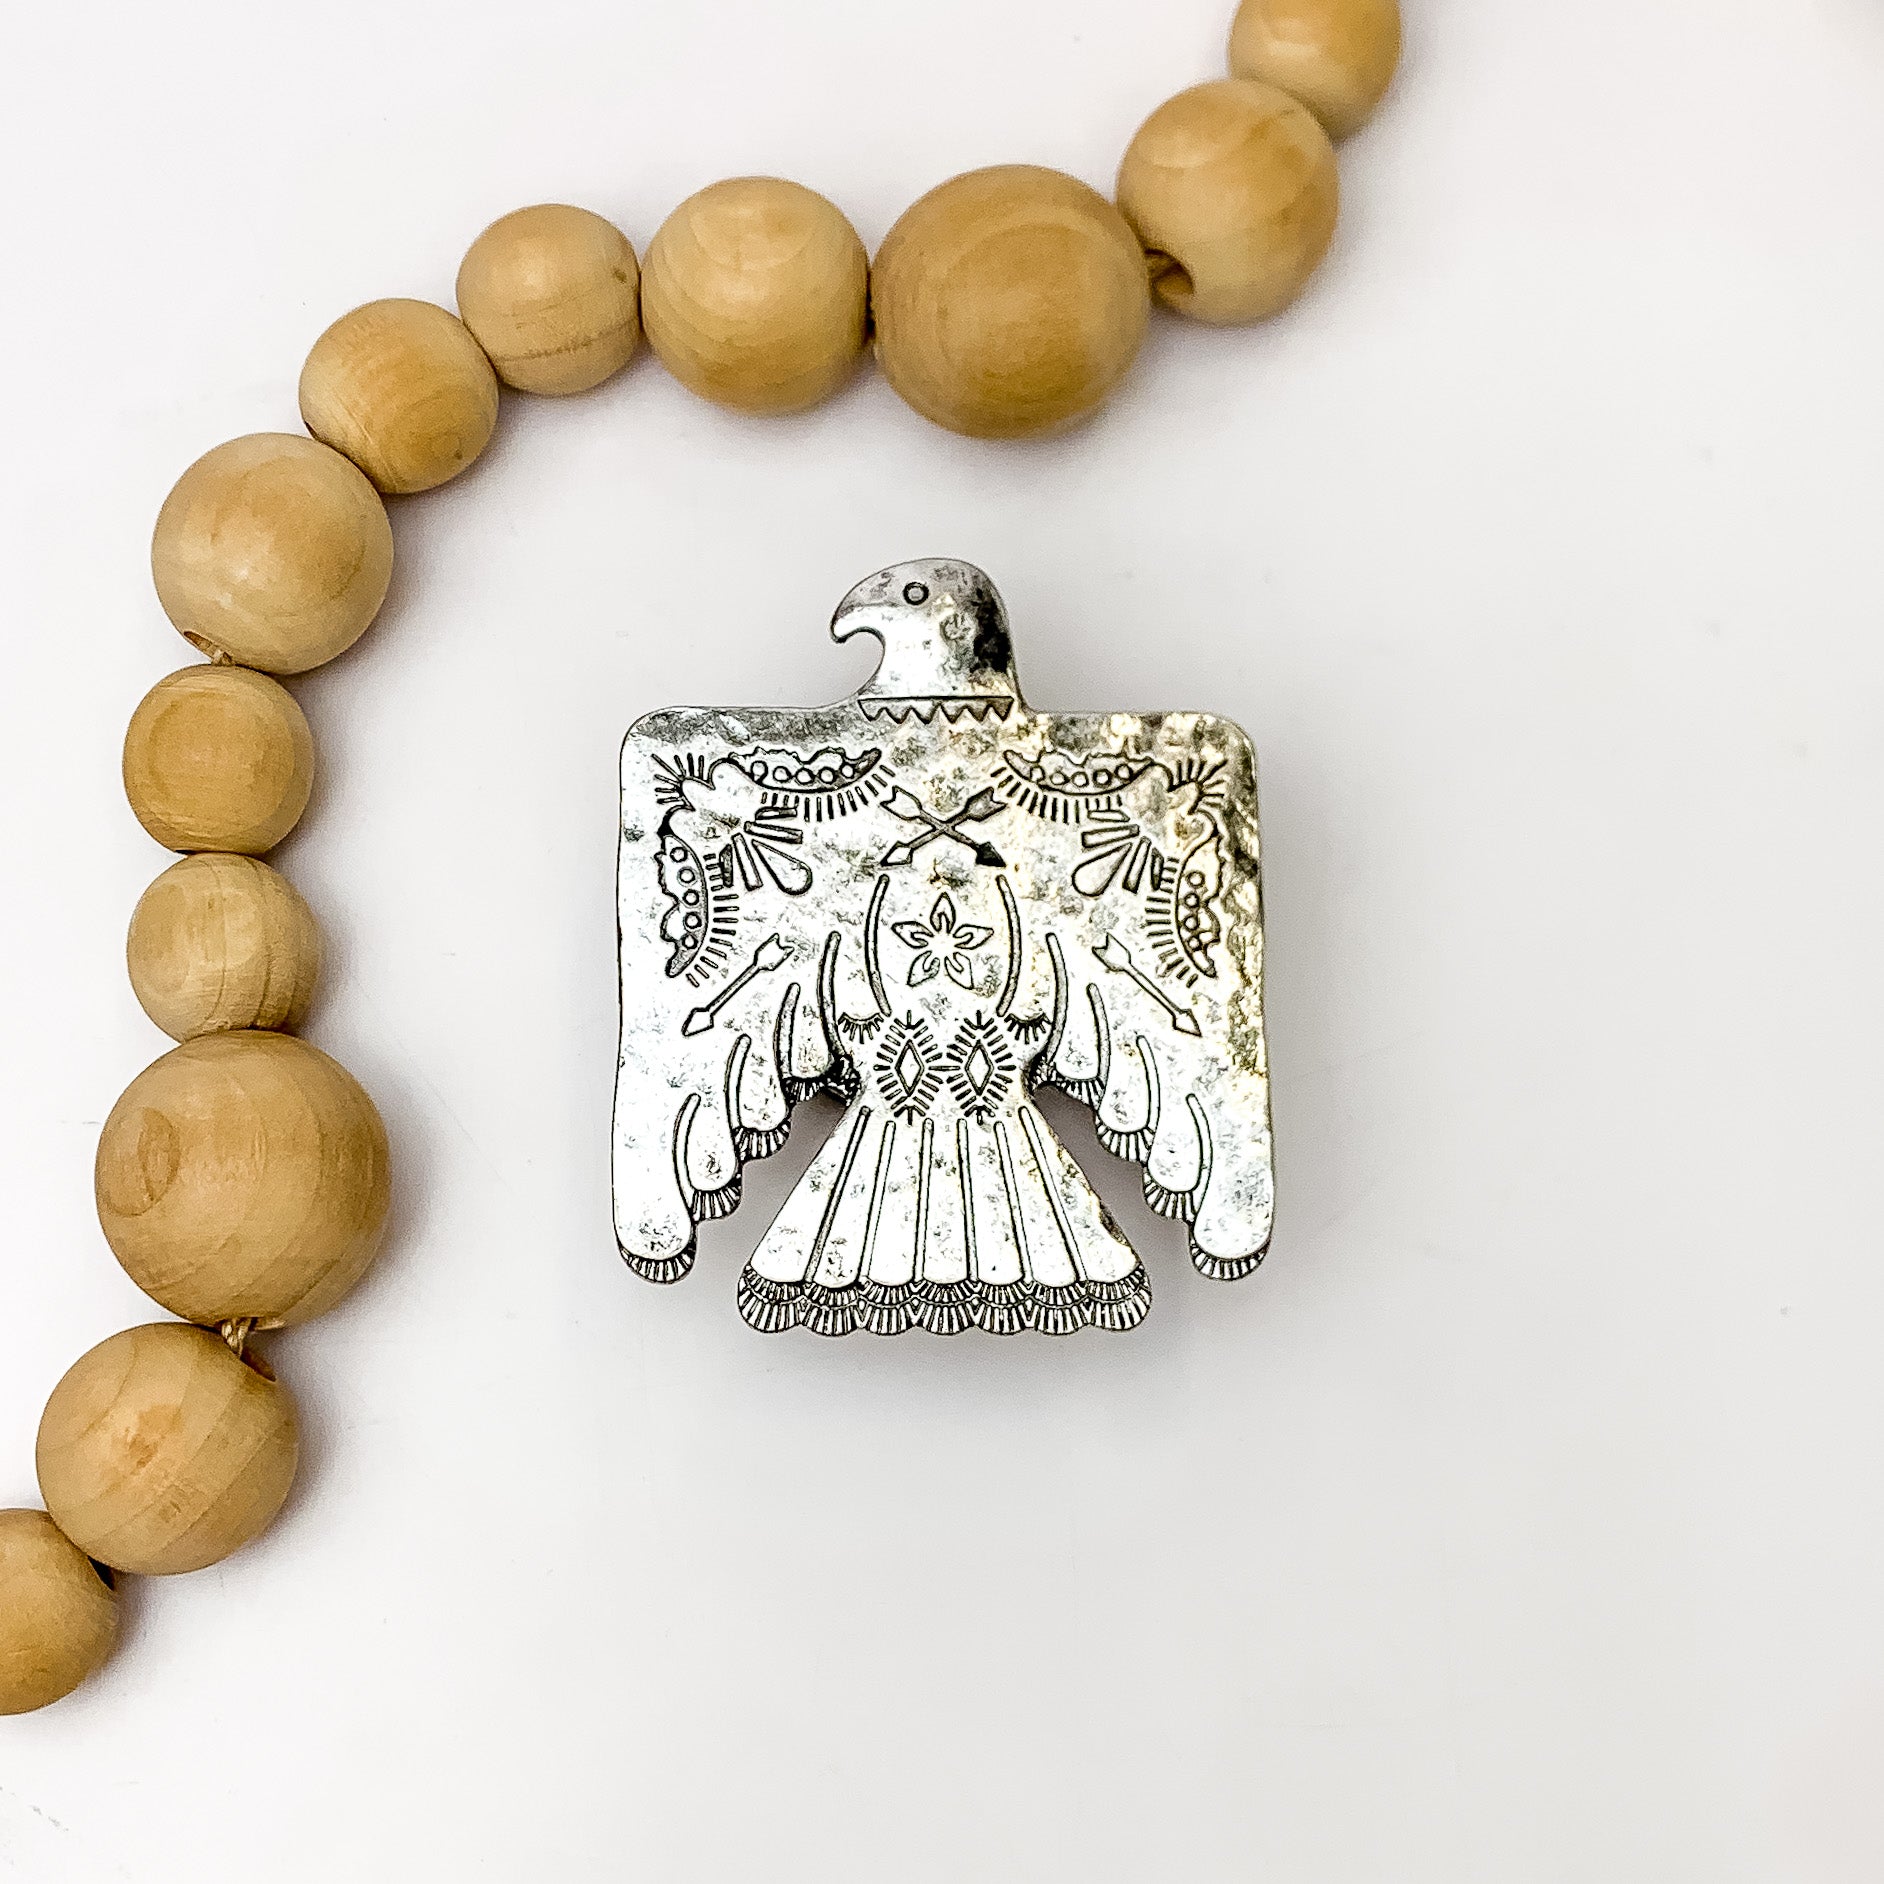 Thunderbird Phone Grip in Silver Tone. Pictured on a white background with wood beads on the side for decoration.